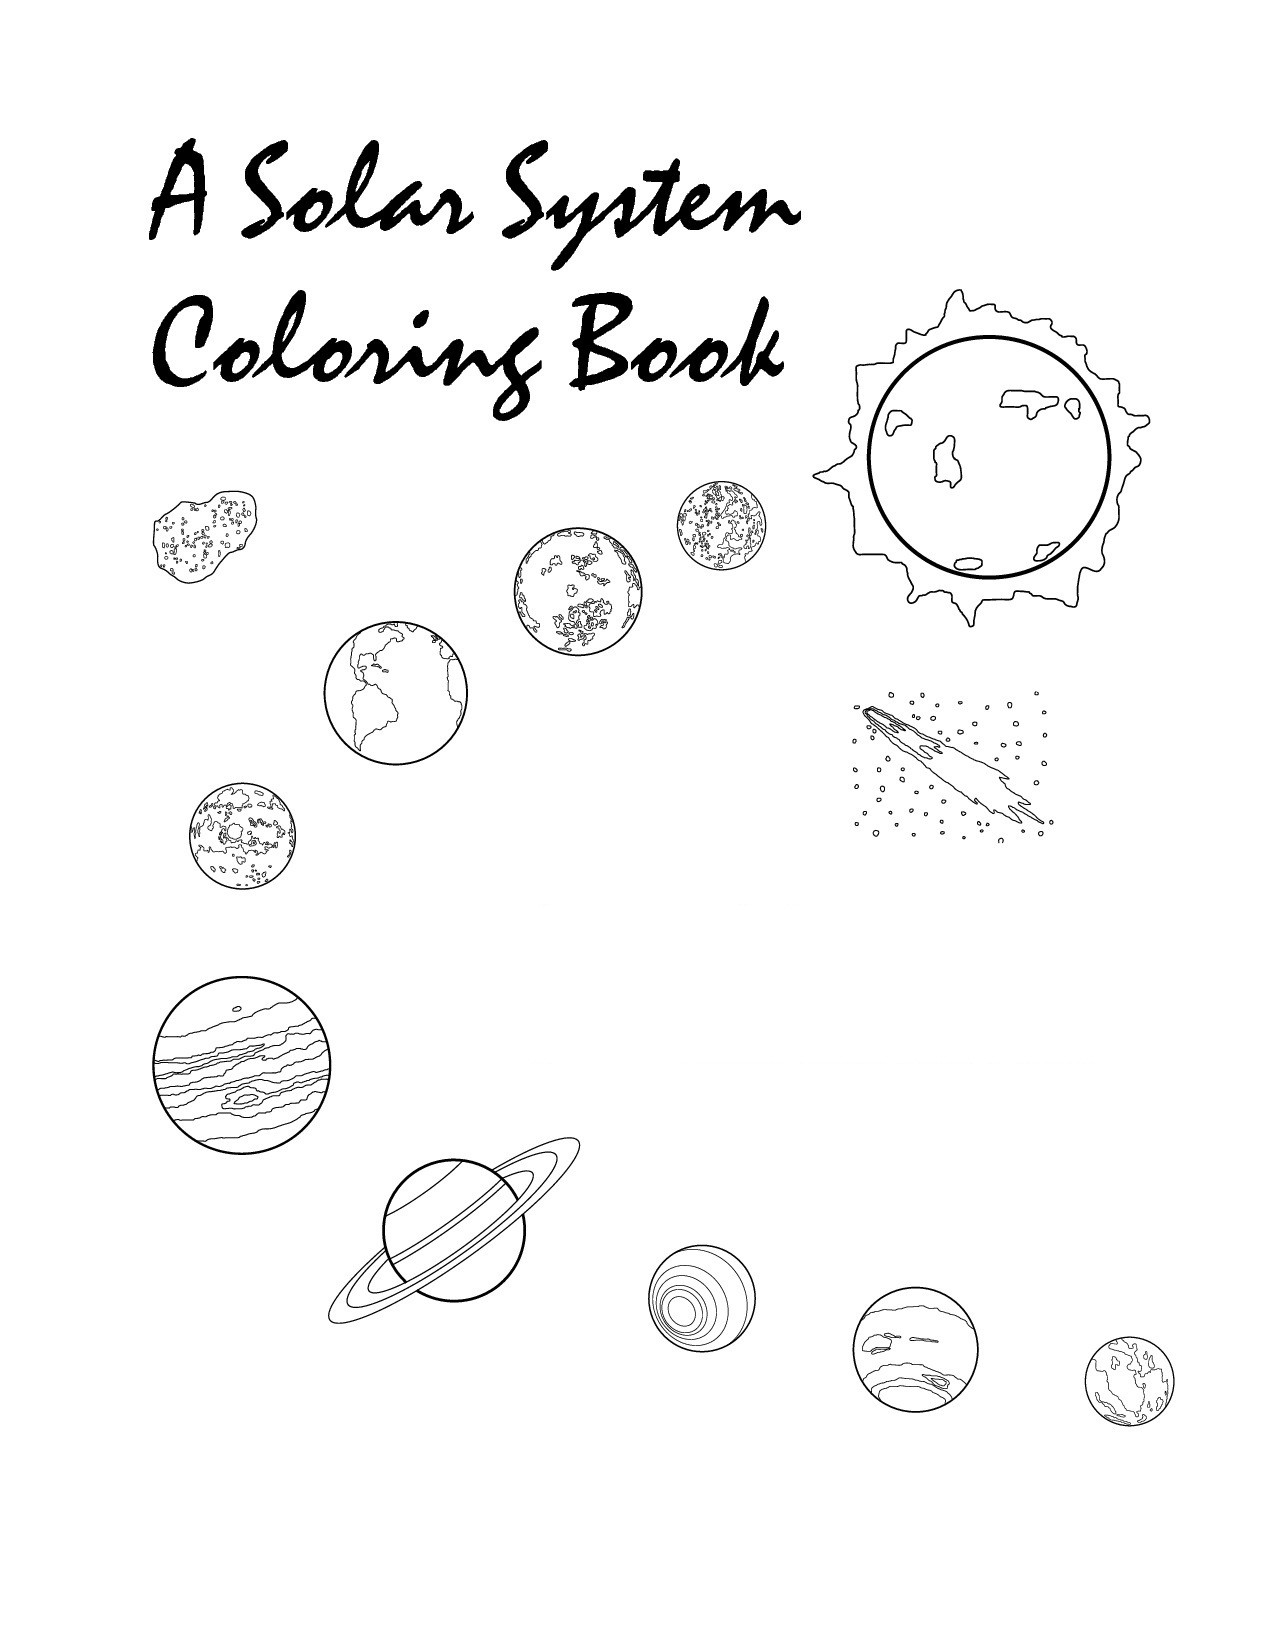 Free Printable Solar System Coloring Pages
 Free Printable Solar System Coloring Pages For Kids